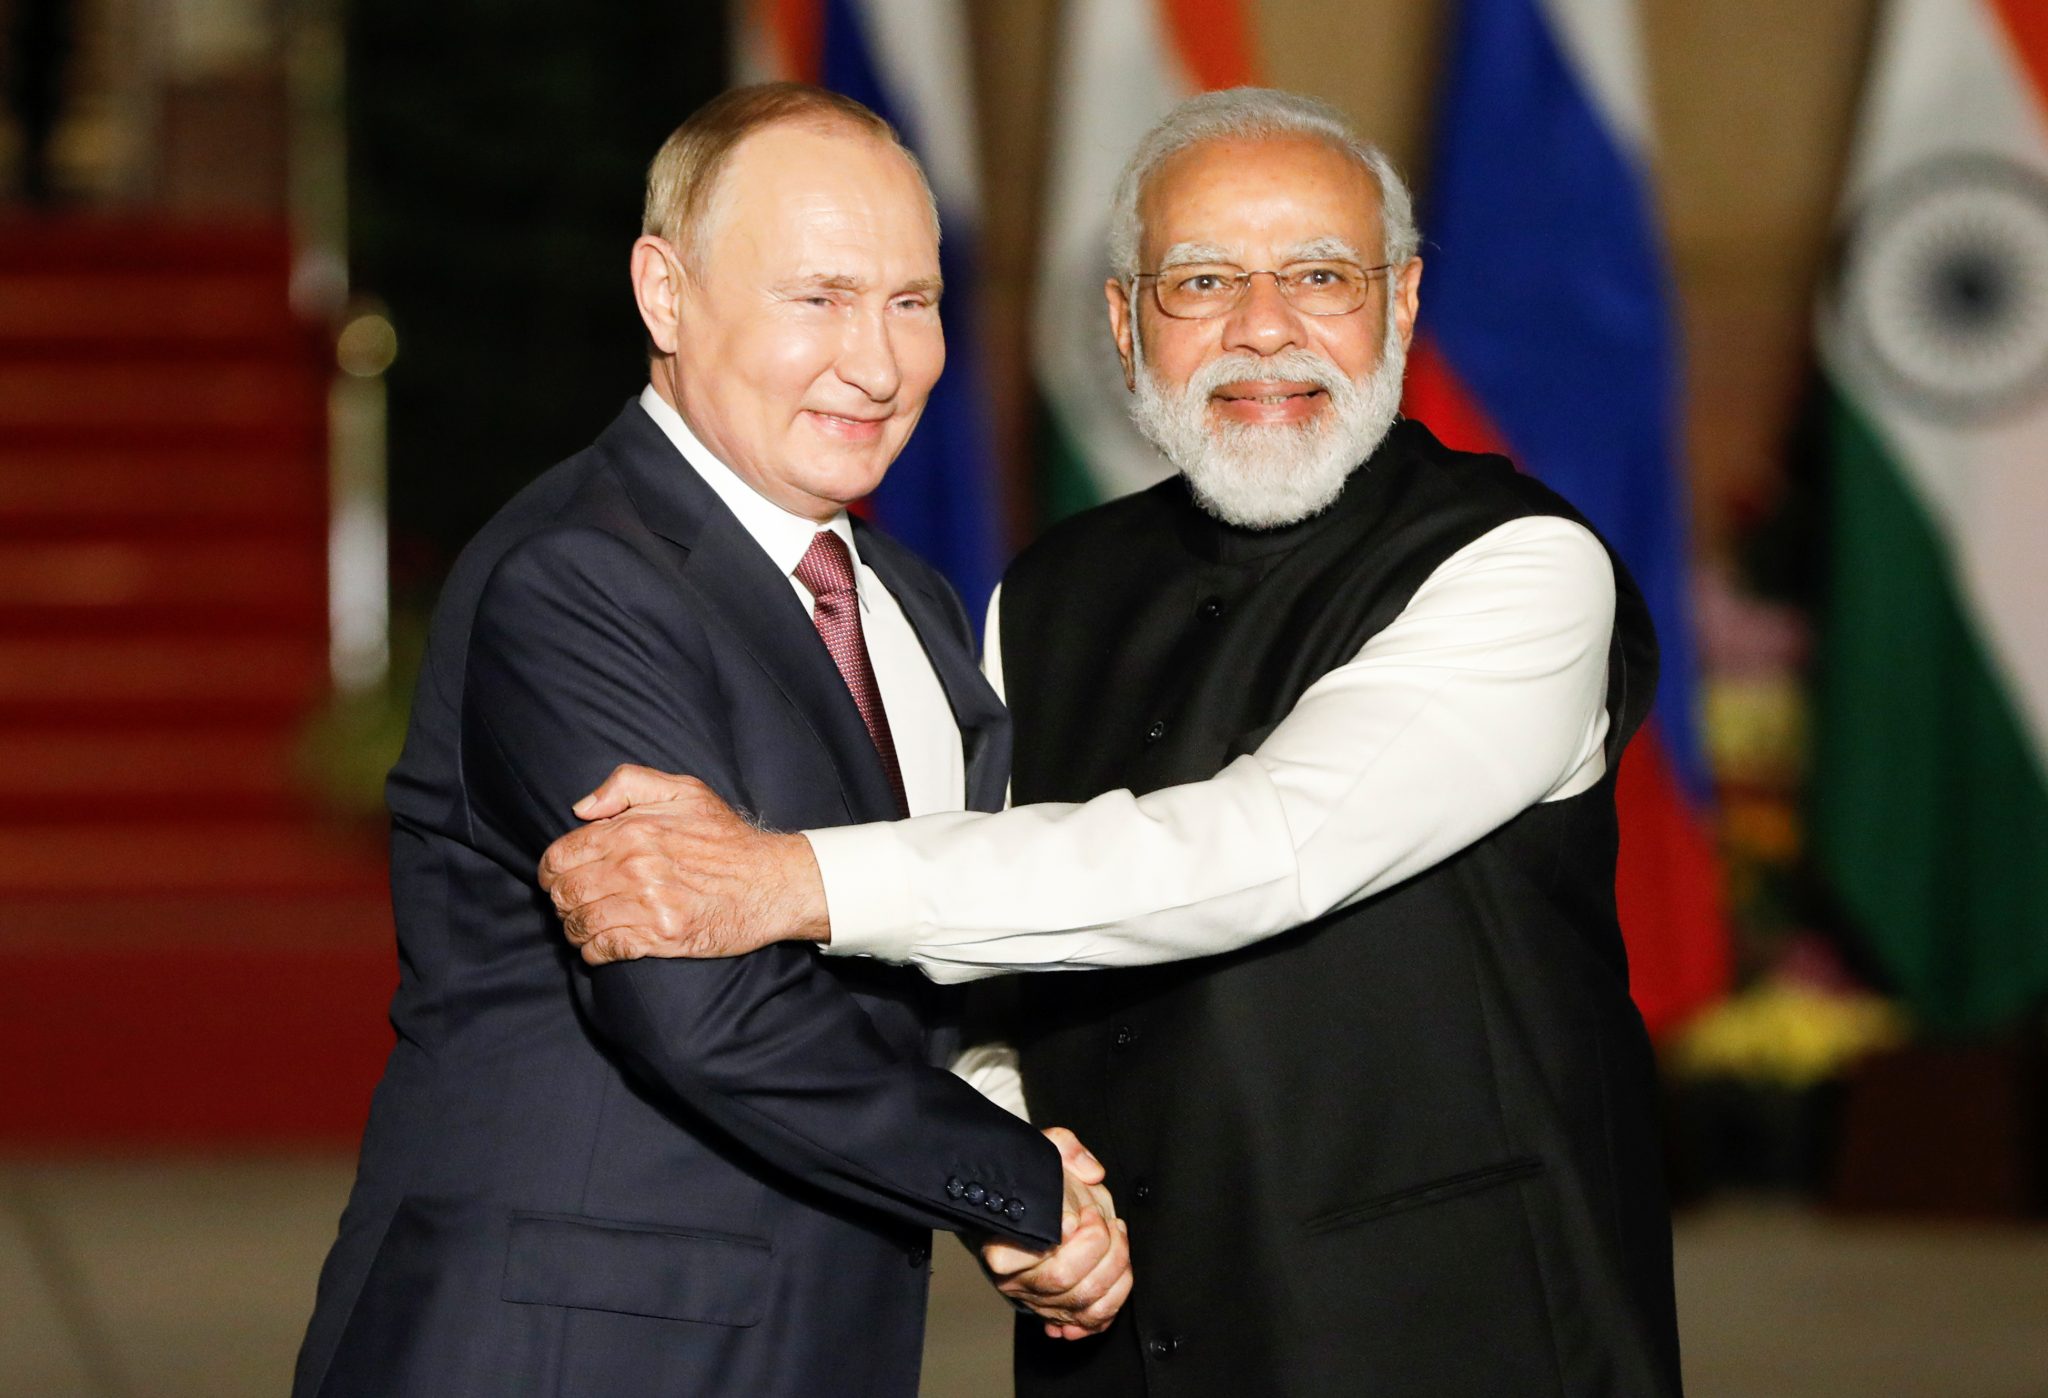 Russia remains India's most dependable energy partner | East Asia Forum